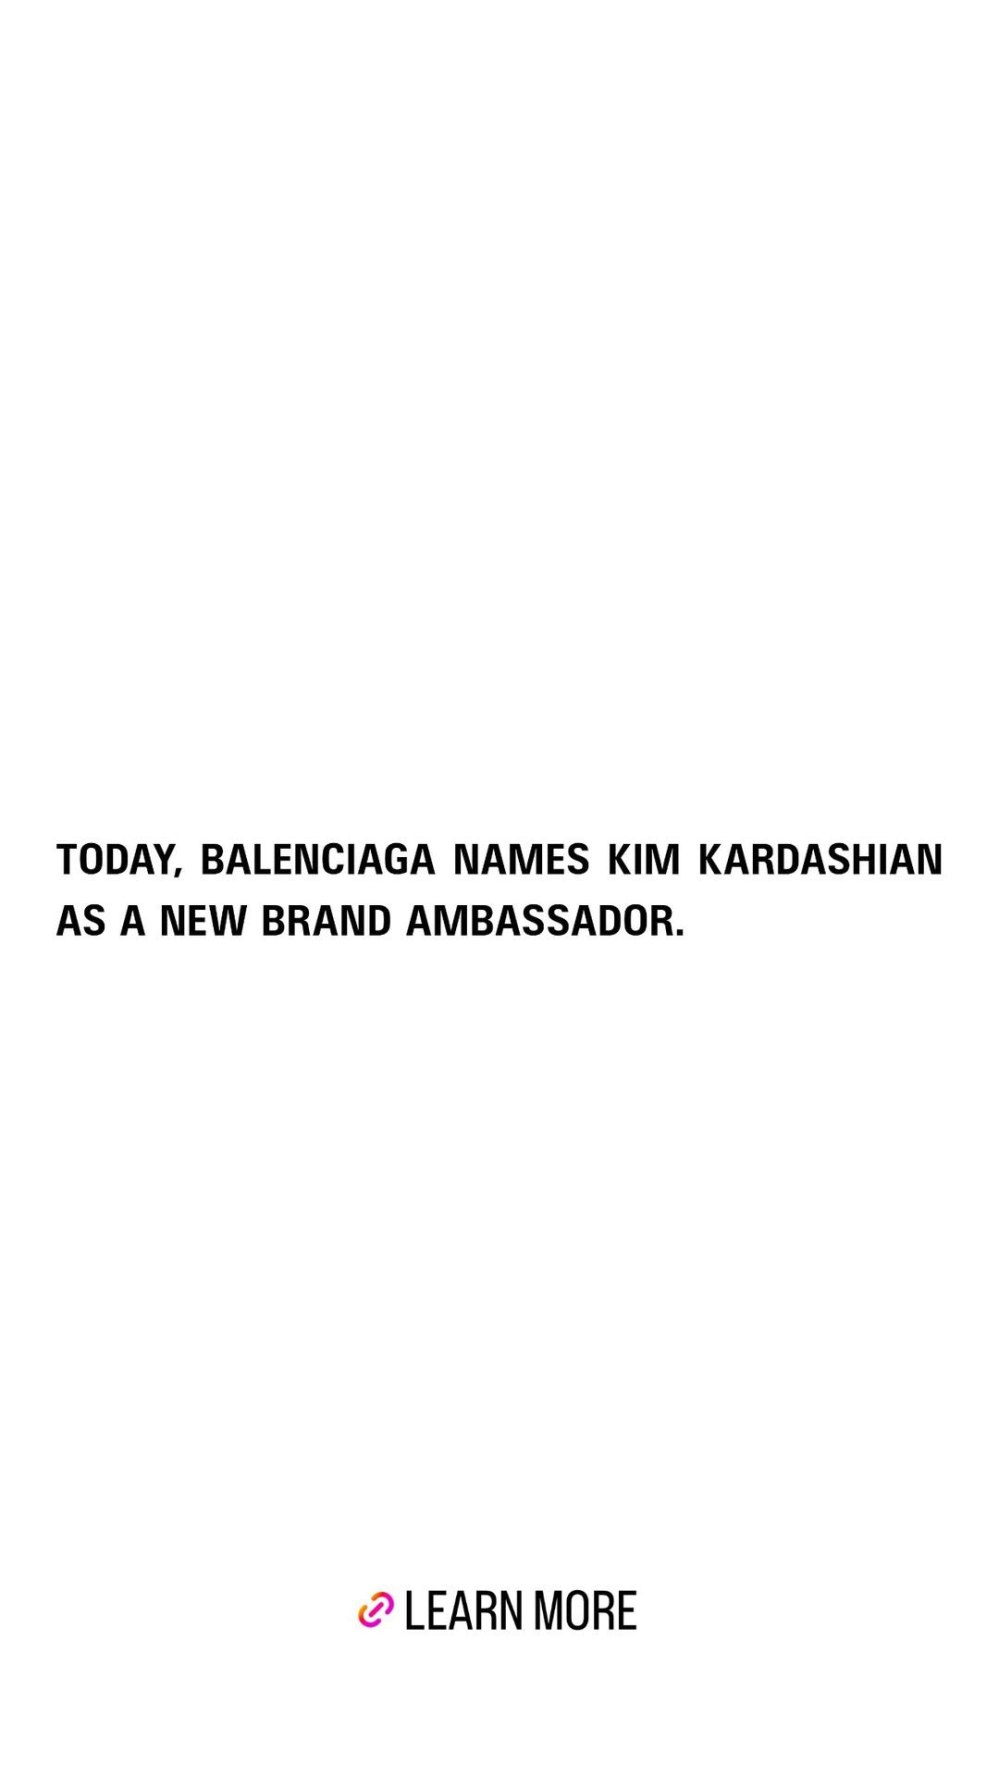 Kim Kardashian Is Balenciagas New Brand Ambassador Im Excited About This Next Chapter